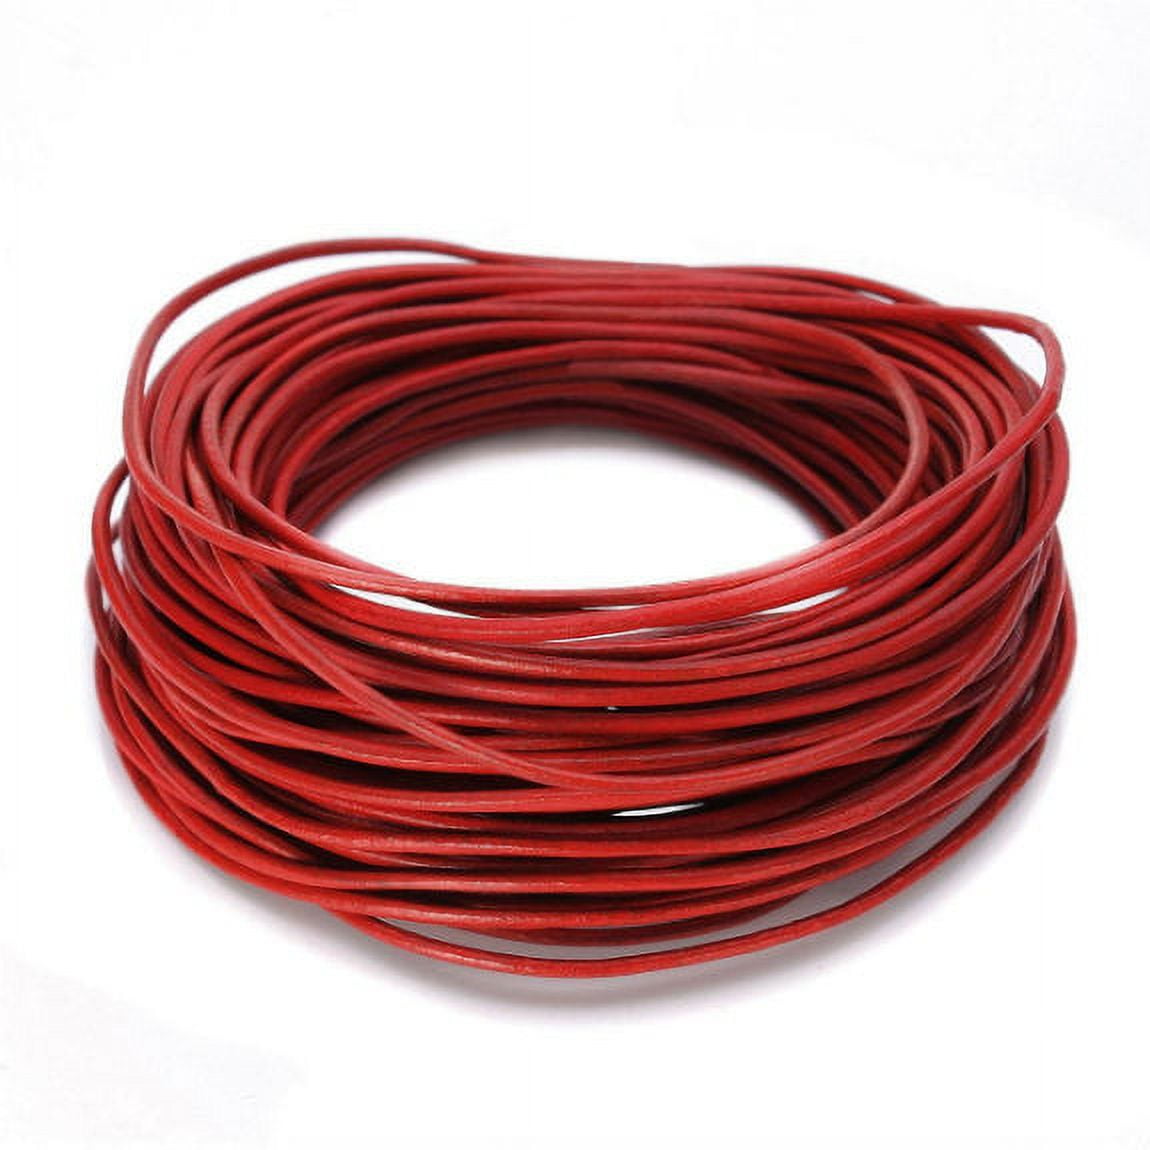 Leather Cord USA 2mm Natural Red Brown Round Leather - by the Foot